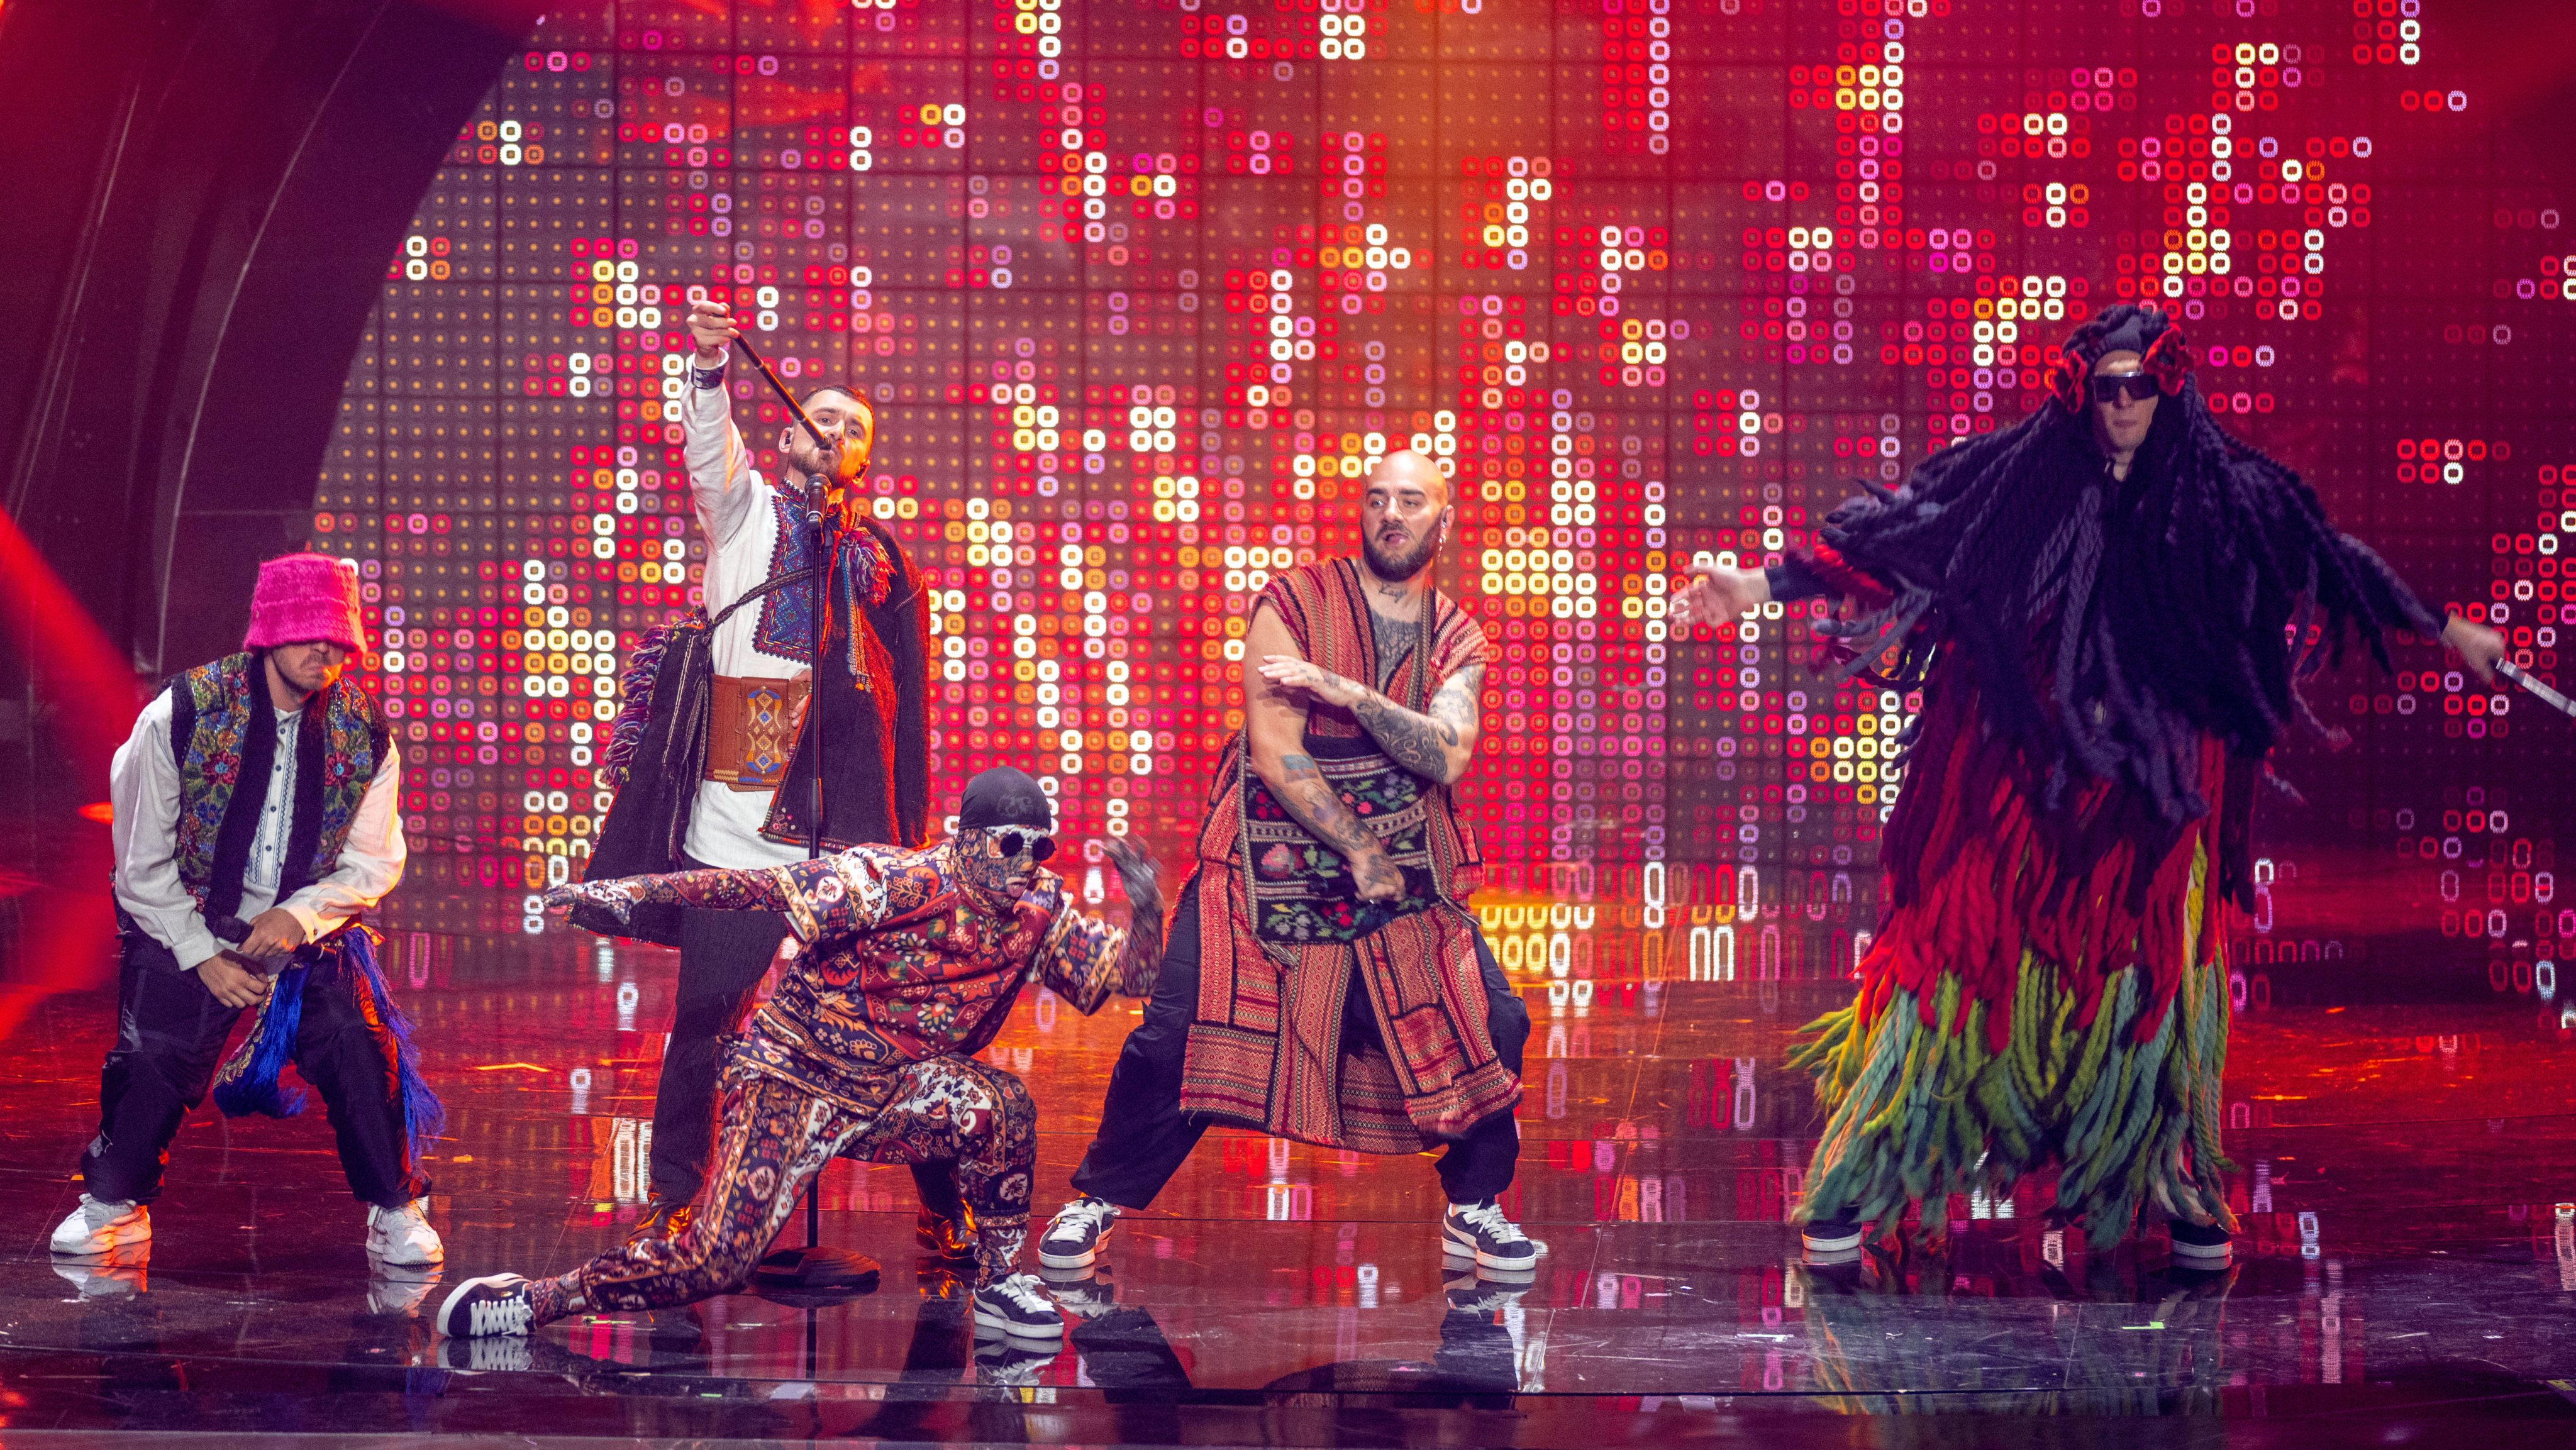 Eurovision Song Contest 2022 in Turin - 2nd dress rehearsal final